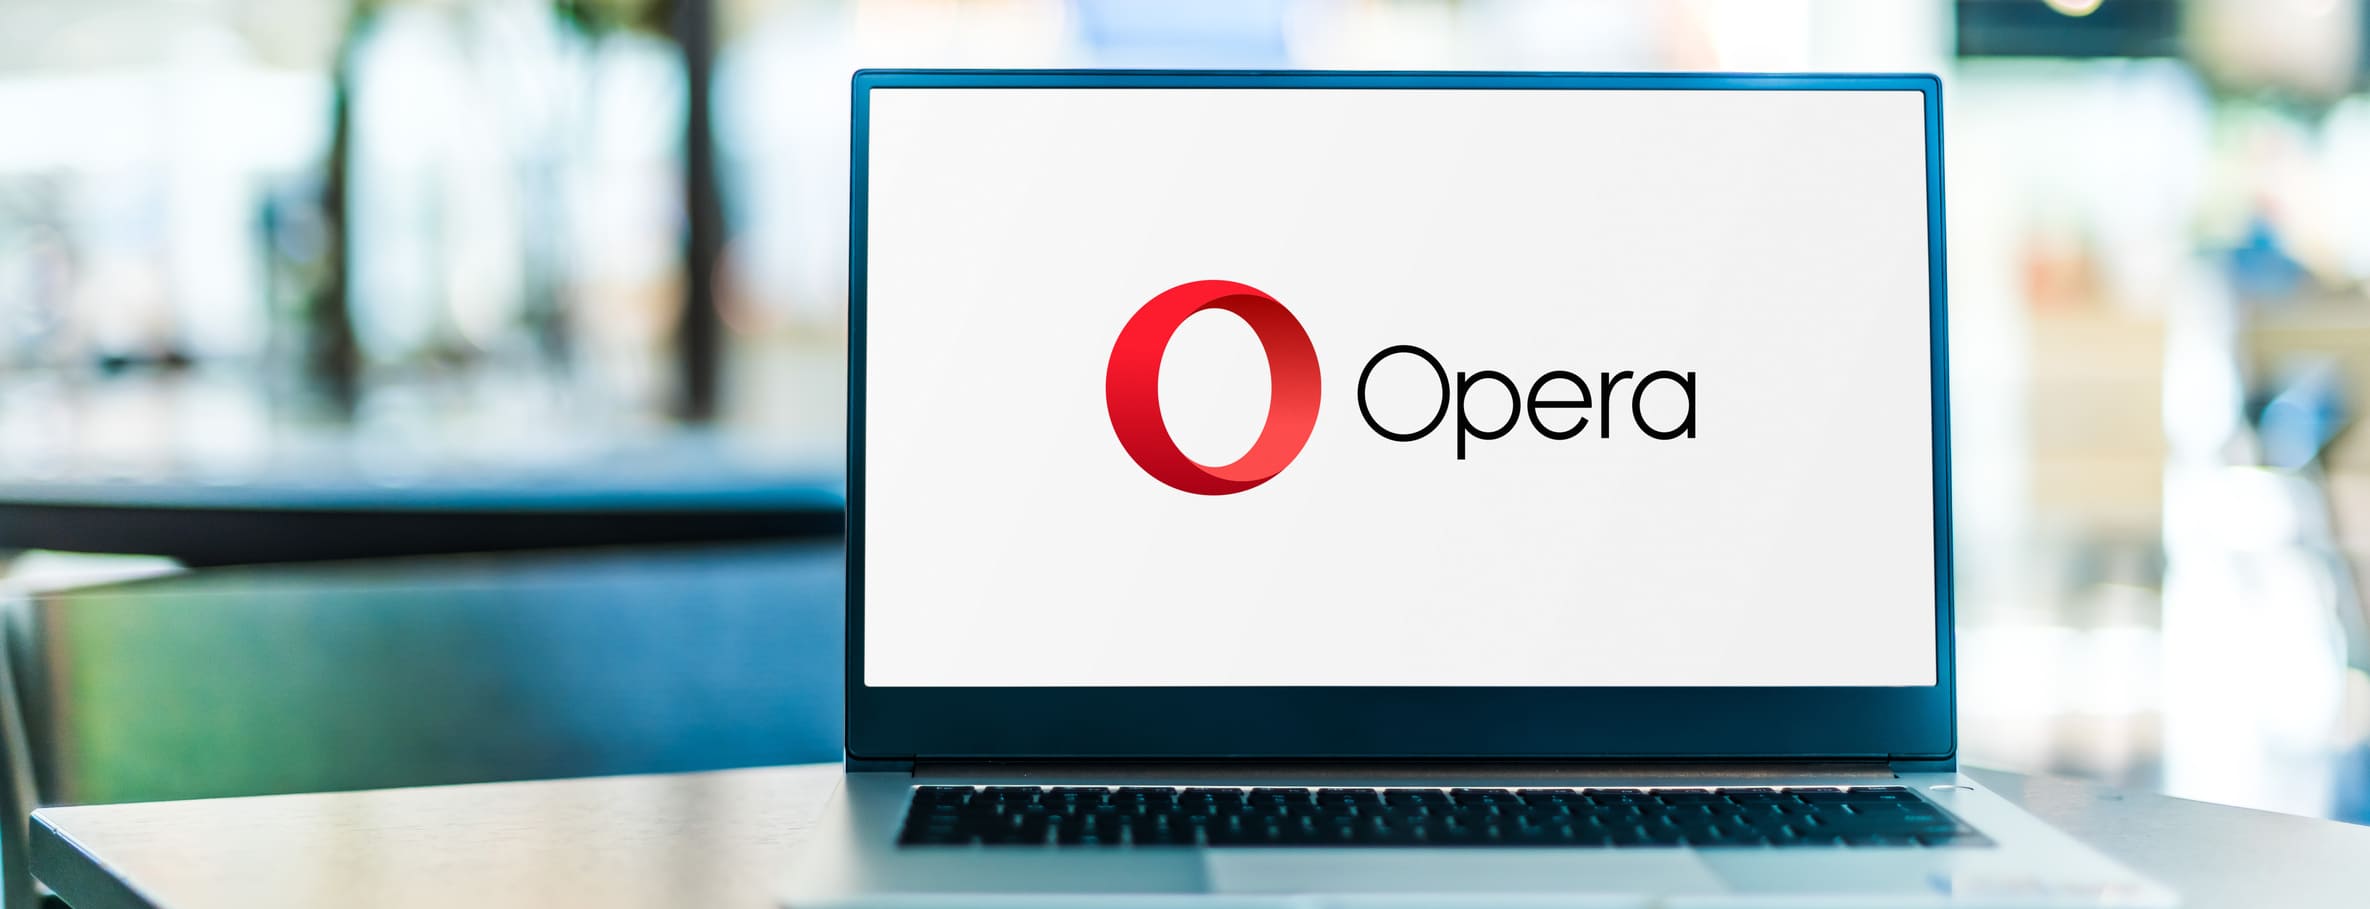 Opera browser integrates support for eight blockchains